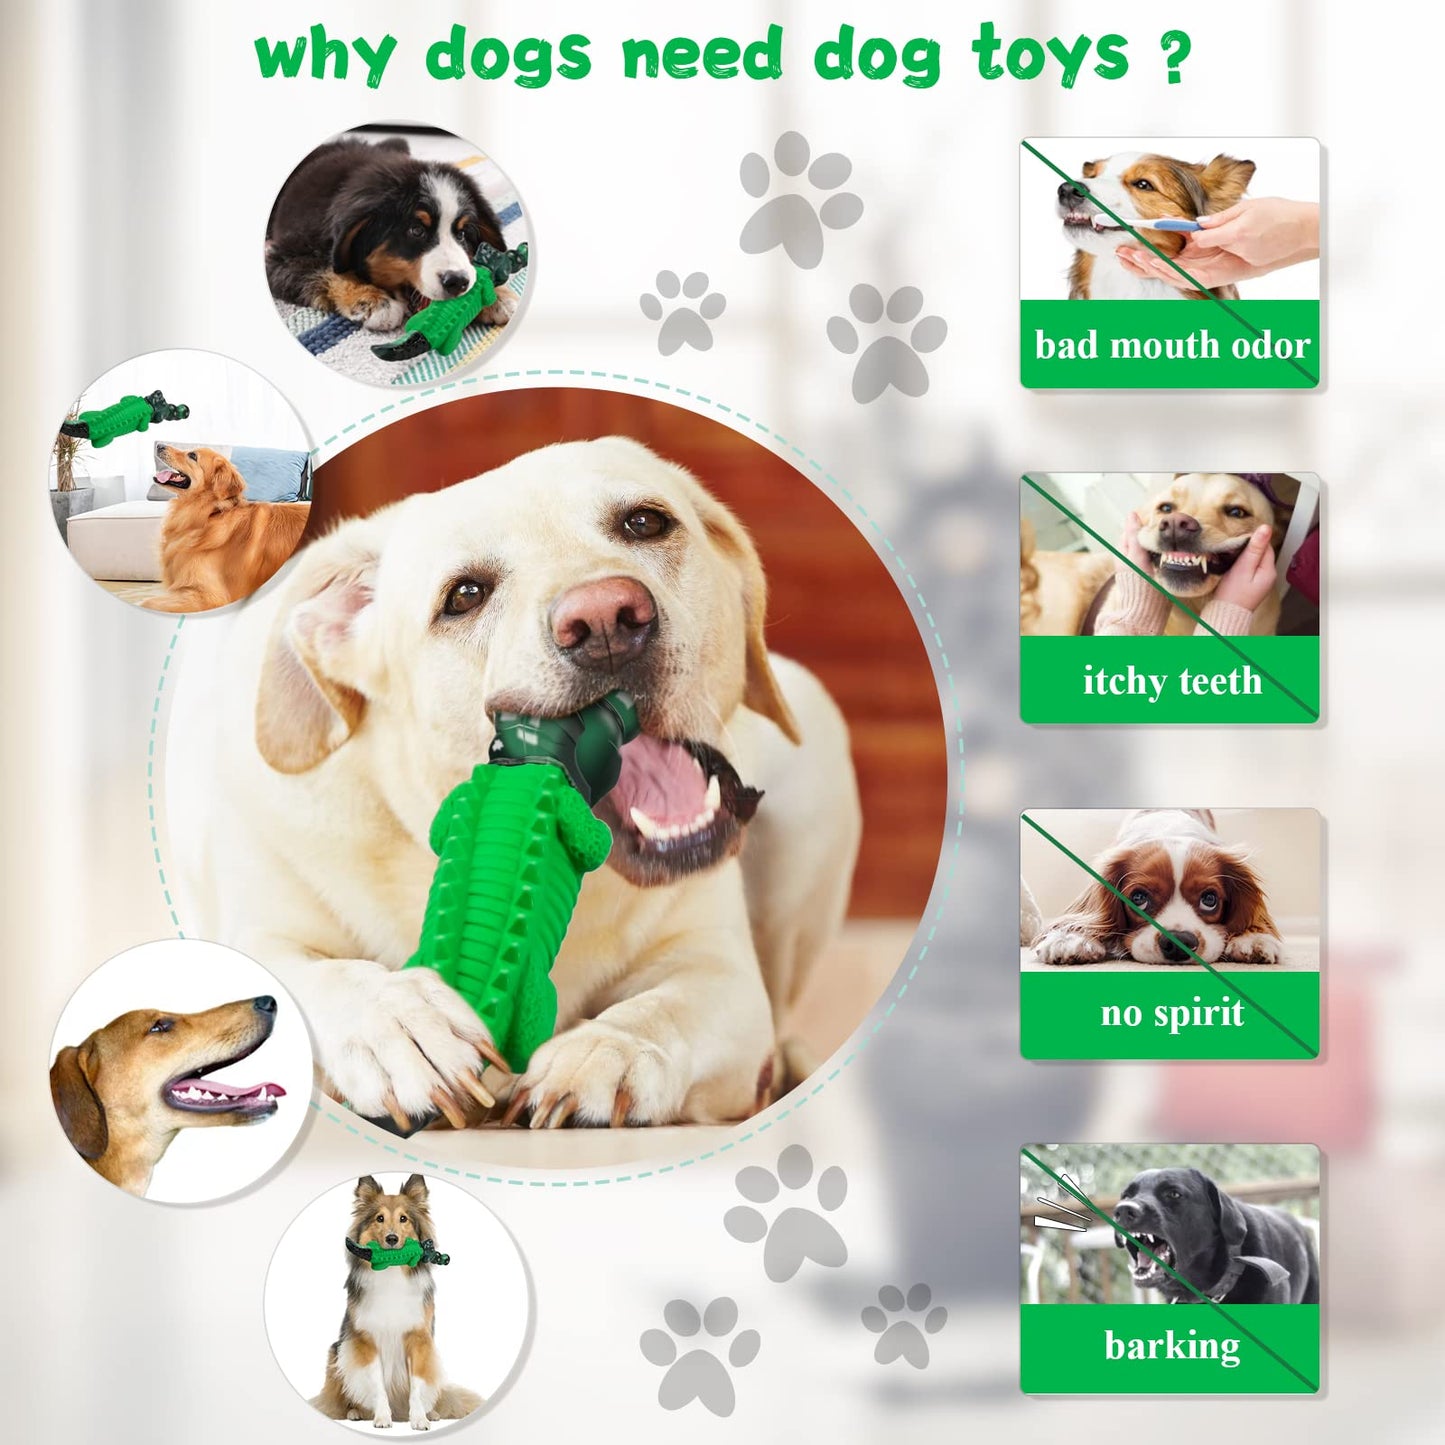 Fuufome Chew Toys for Aggressive Chewers: Tough Indestructible Toys for Large Dogs - Heavy Duty Durable Toys for Small, Medium and Large Dog Breeds